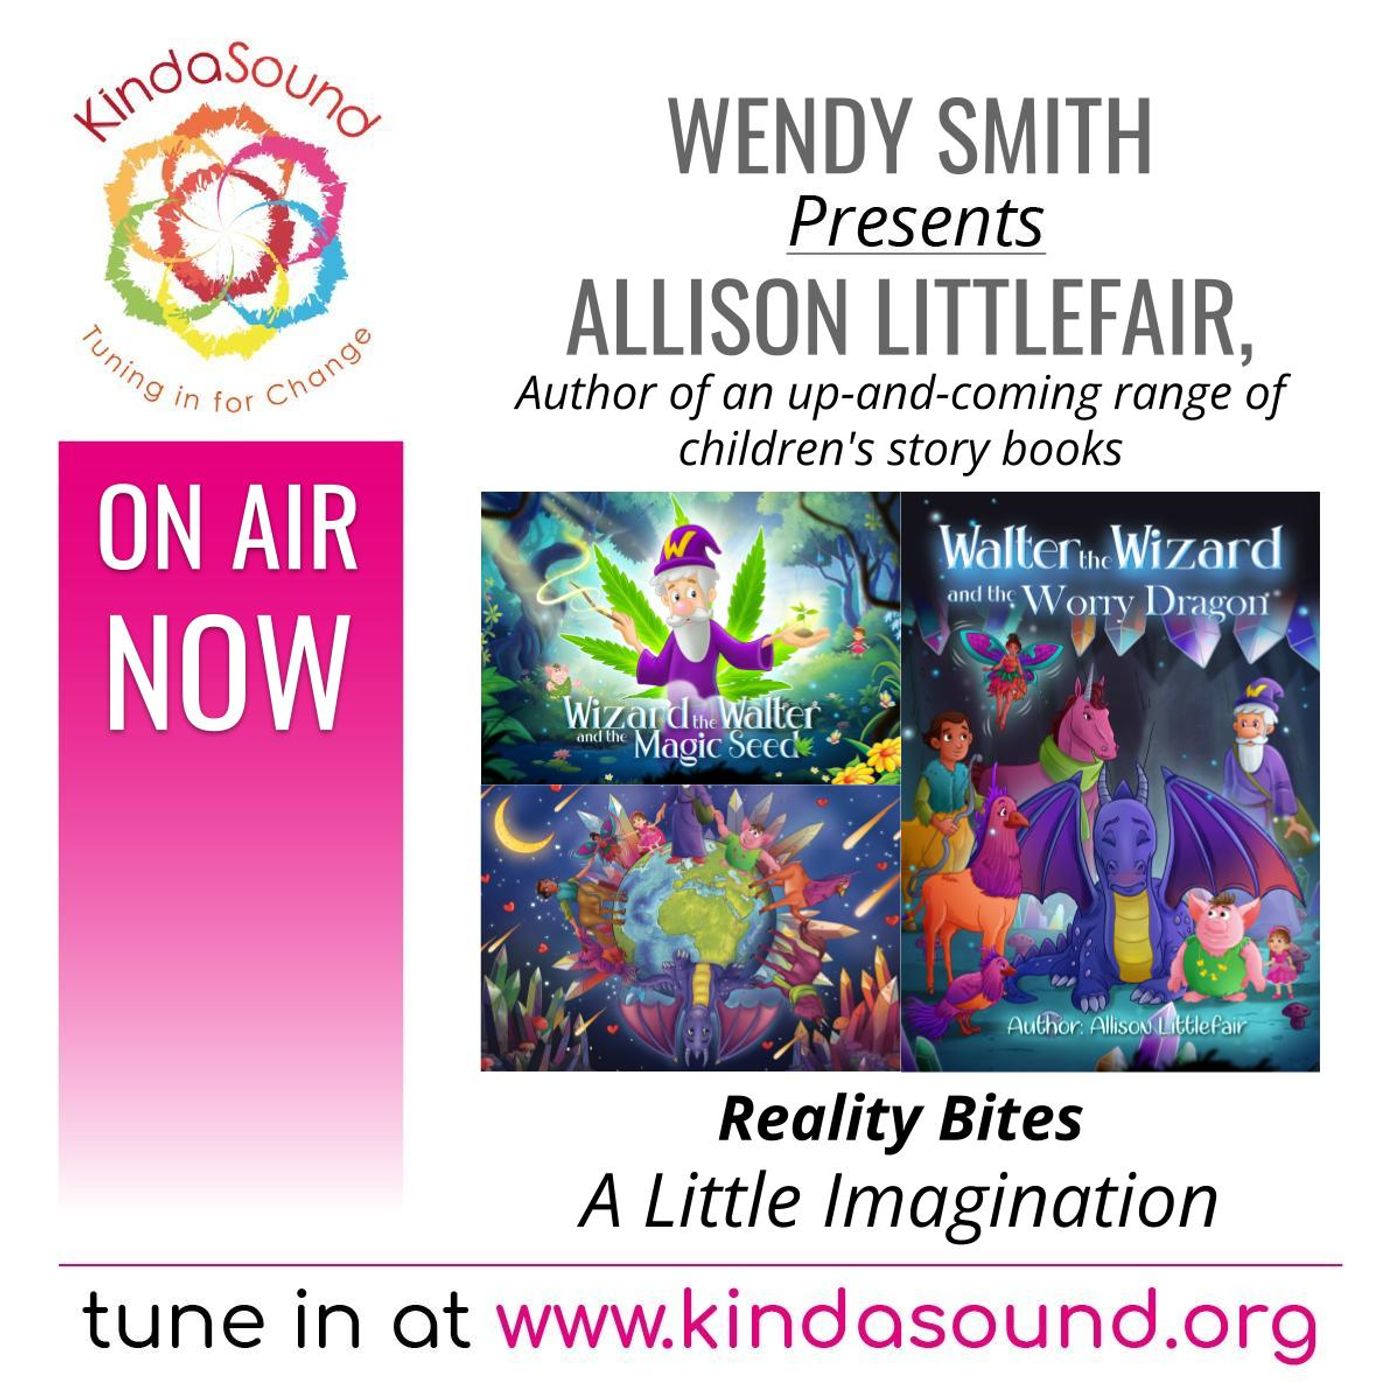 A Little Imagination | Allison Littlefair on Reality Bites with Wendy Smith